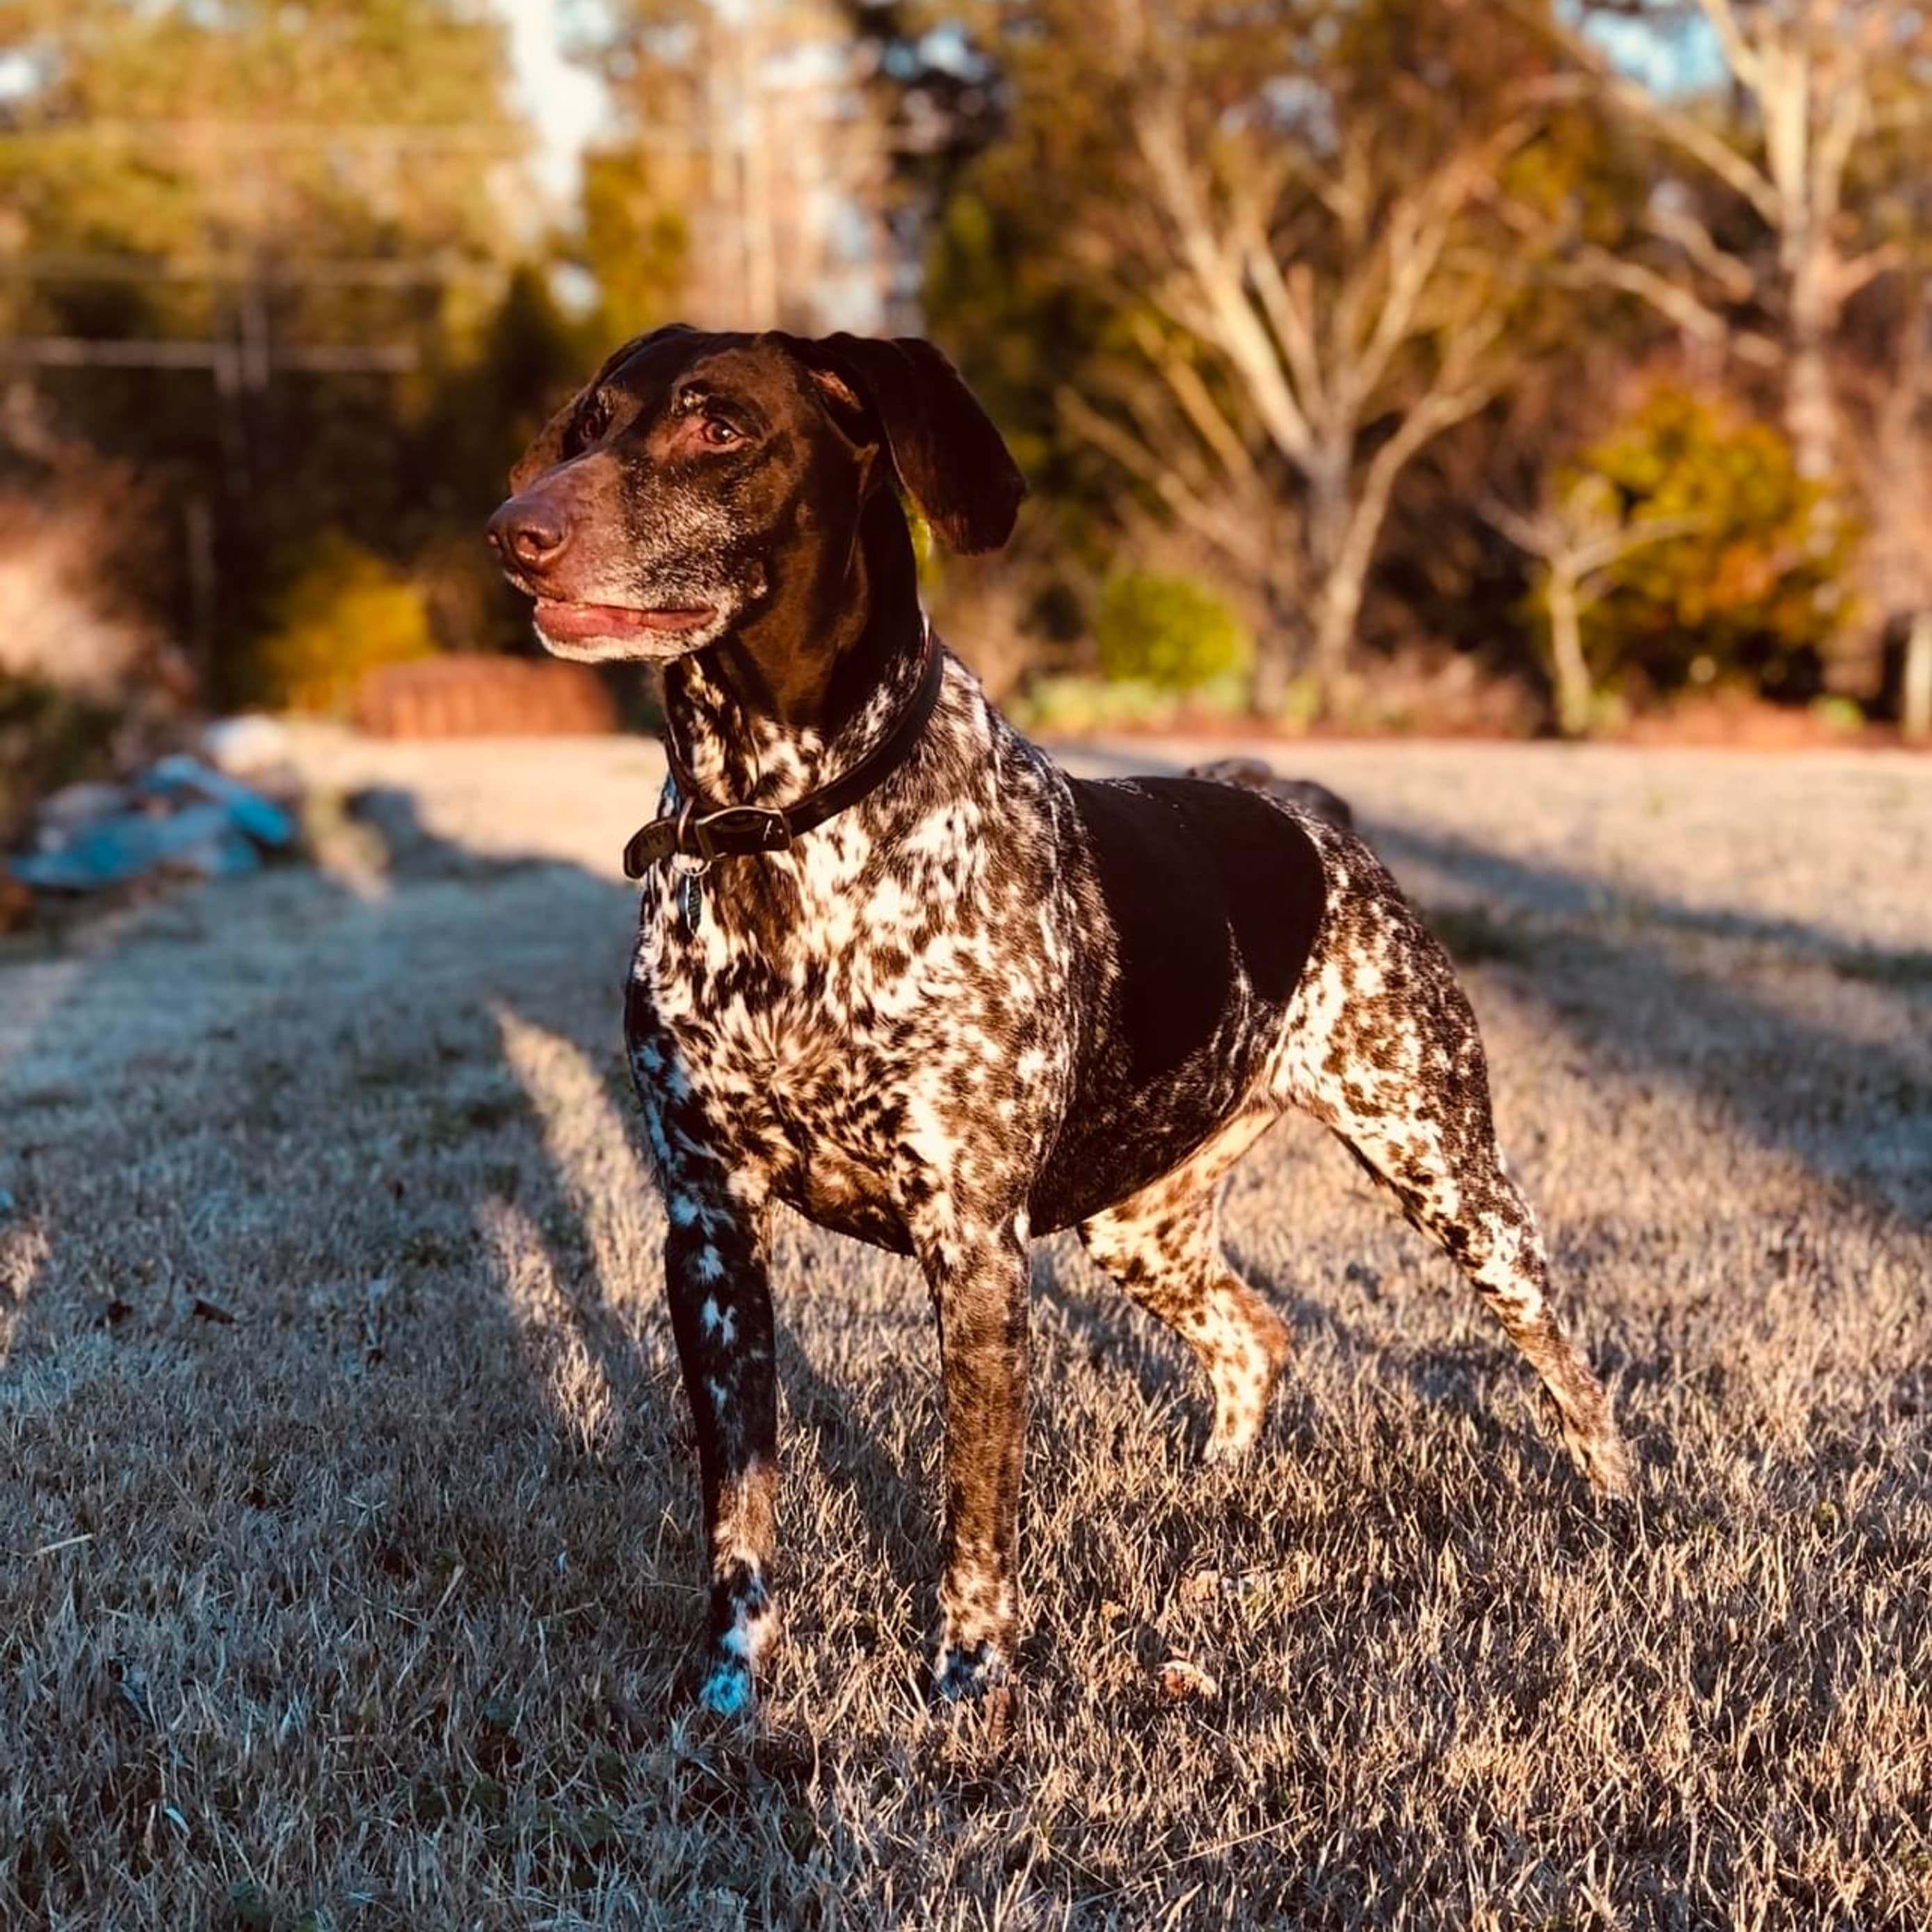 Available: Consistent Animal Lover in Wetumpka, Alabama